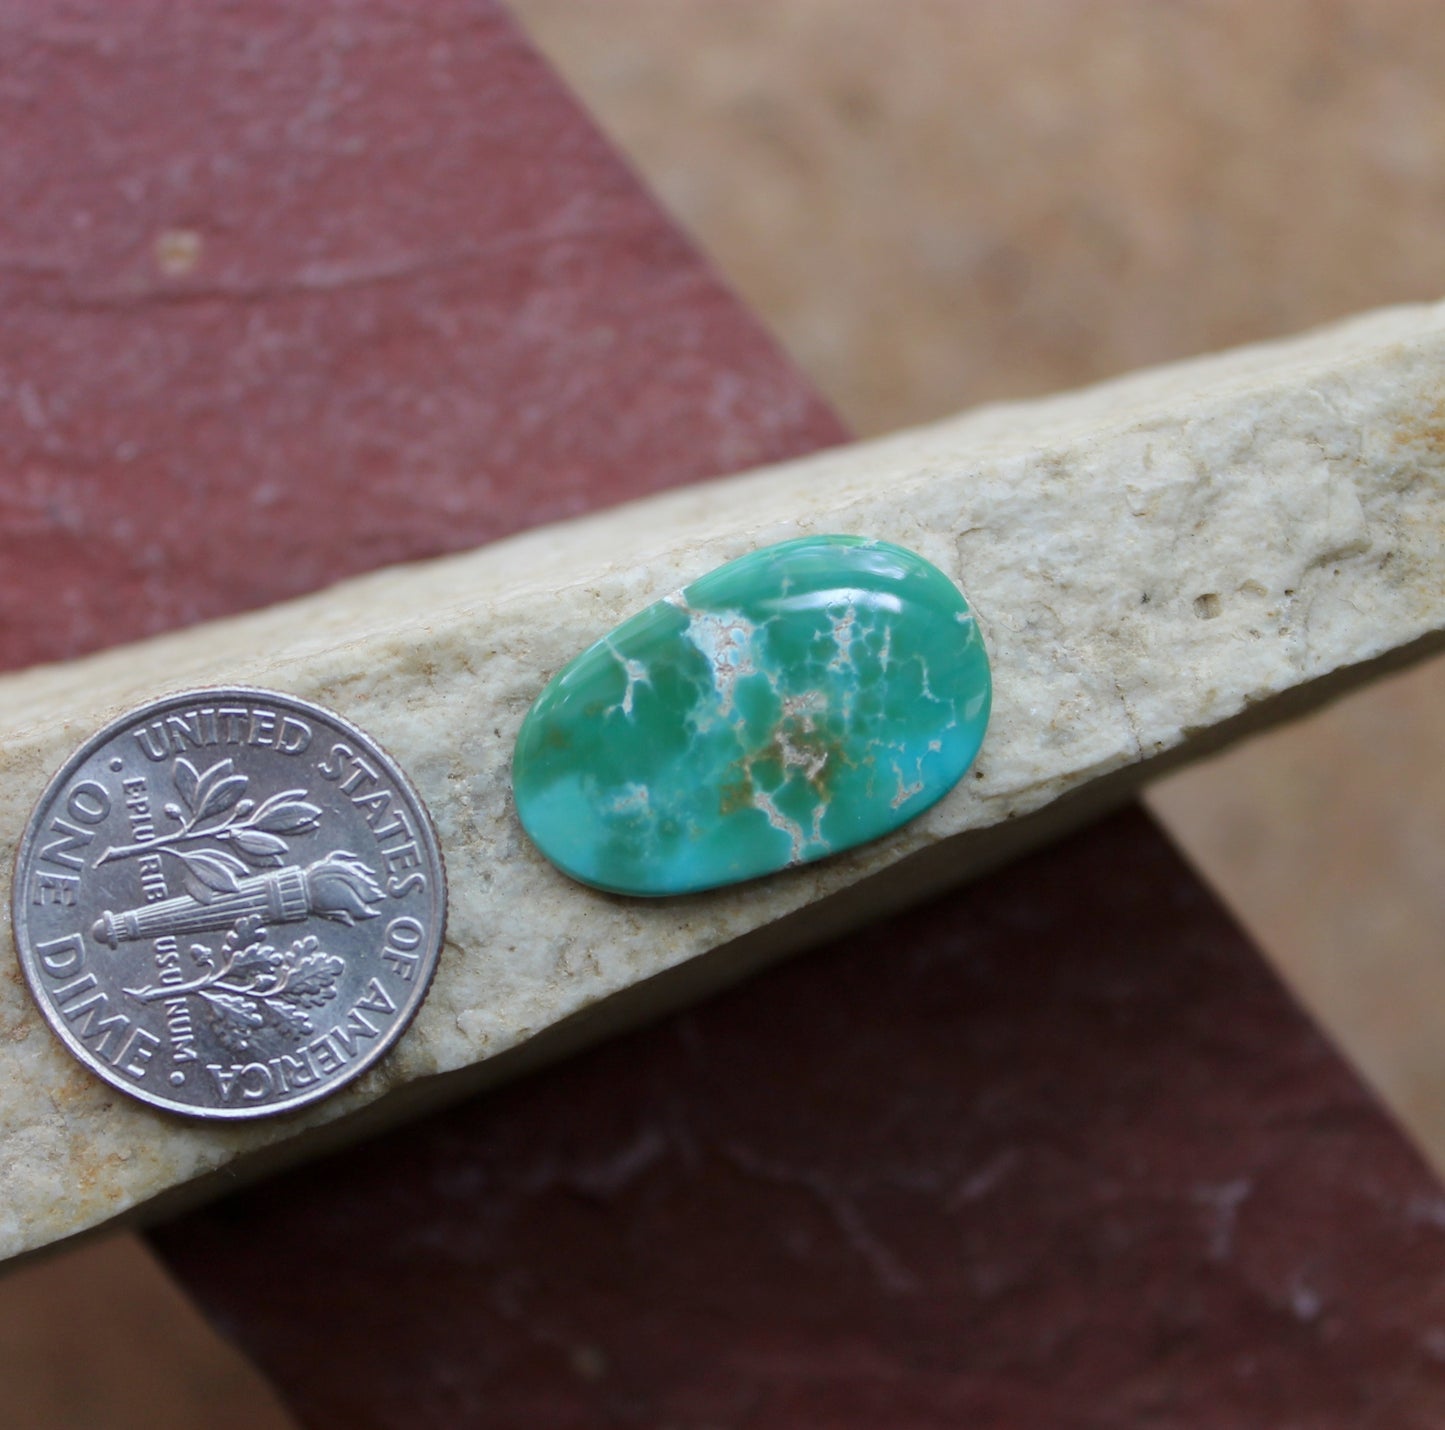 6 carat green turquoise cabochon from Stone Mountain Mine